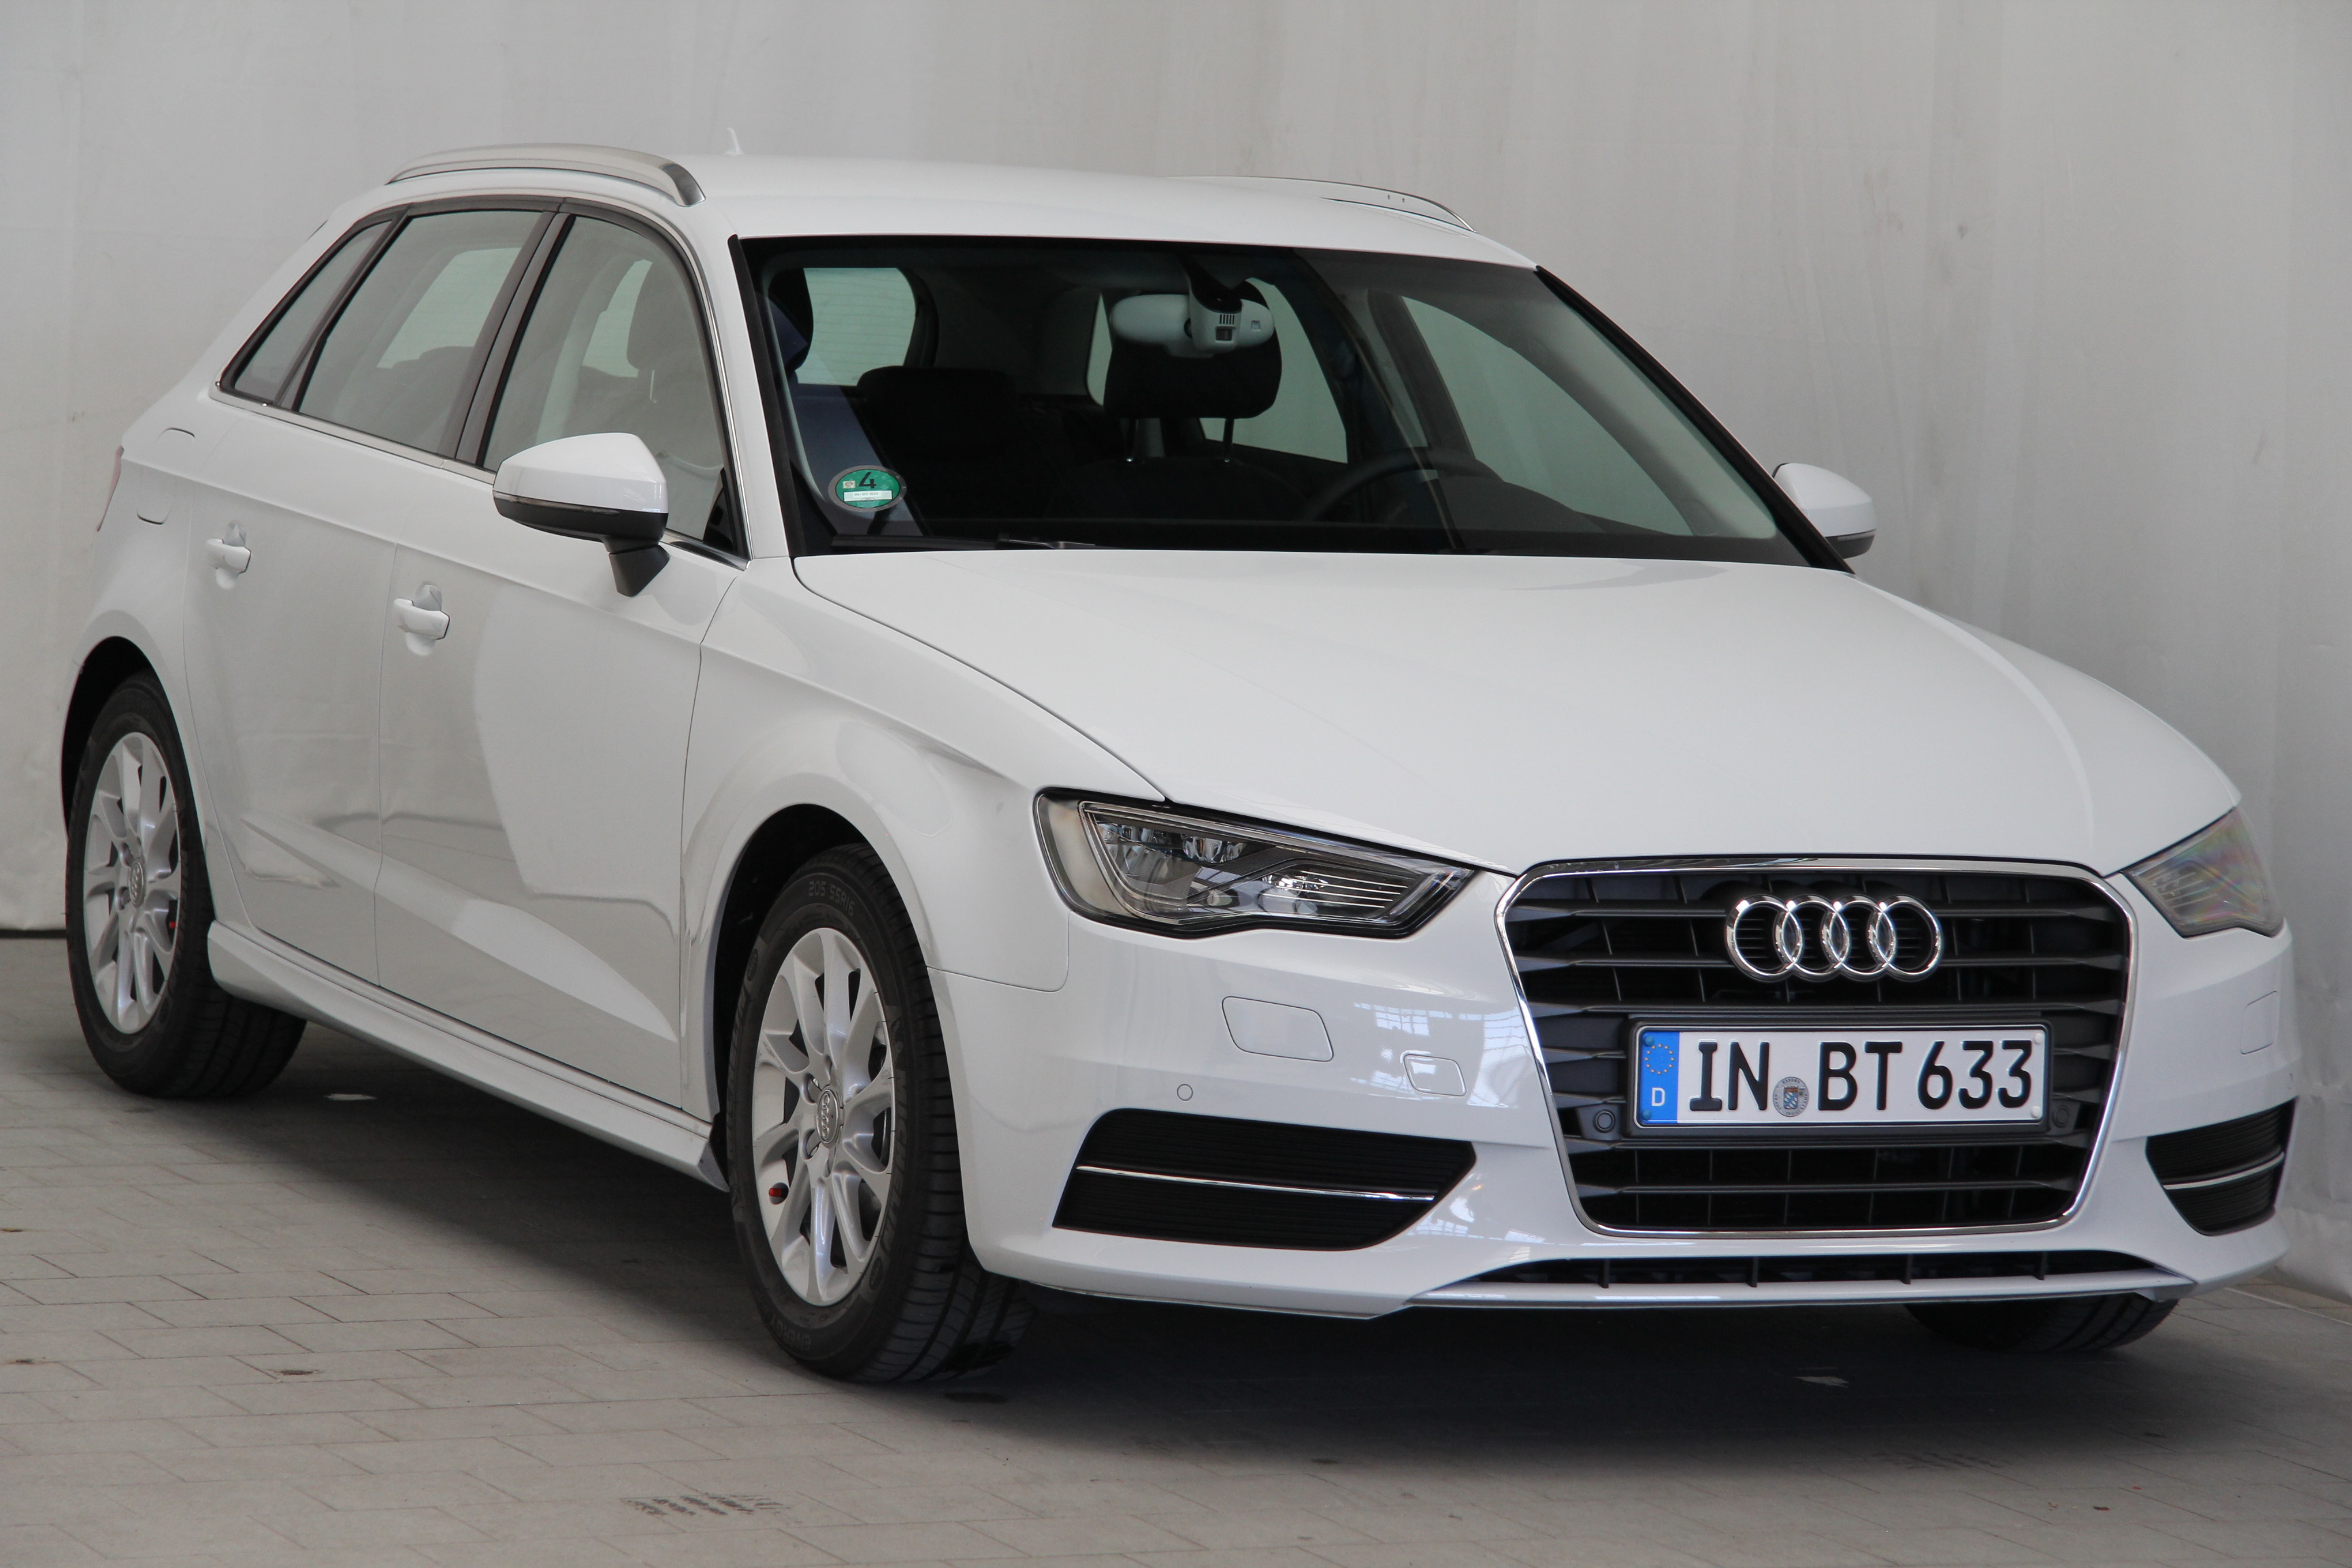 Audi A3 Sportback g-tron interior specifications